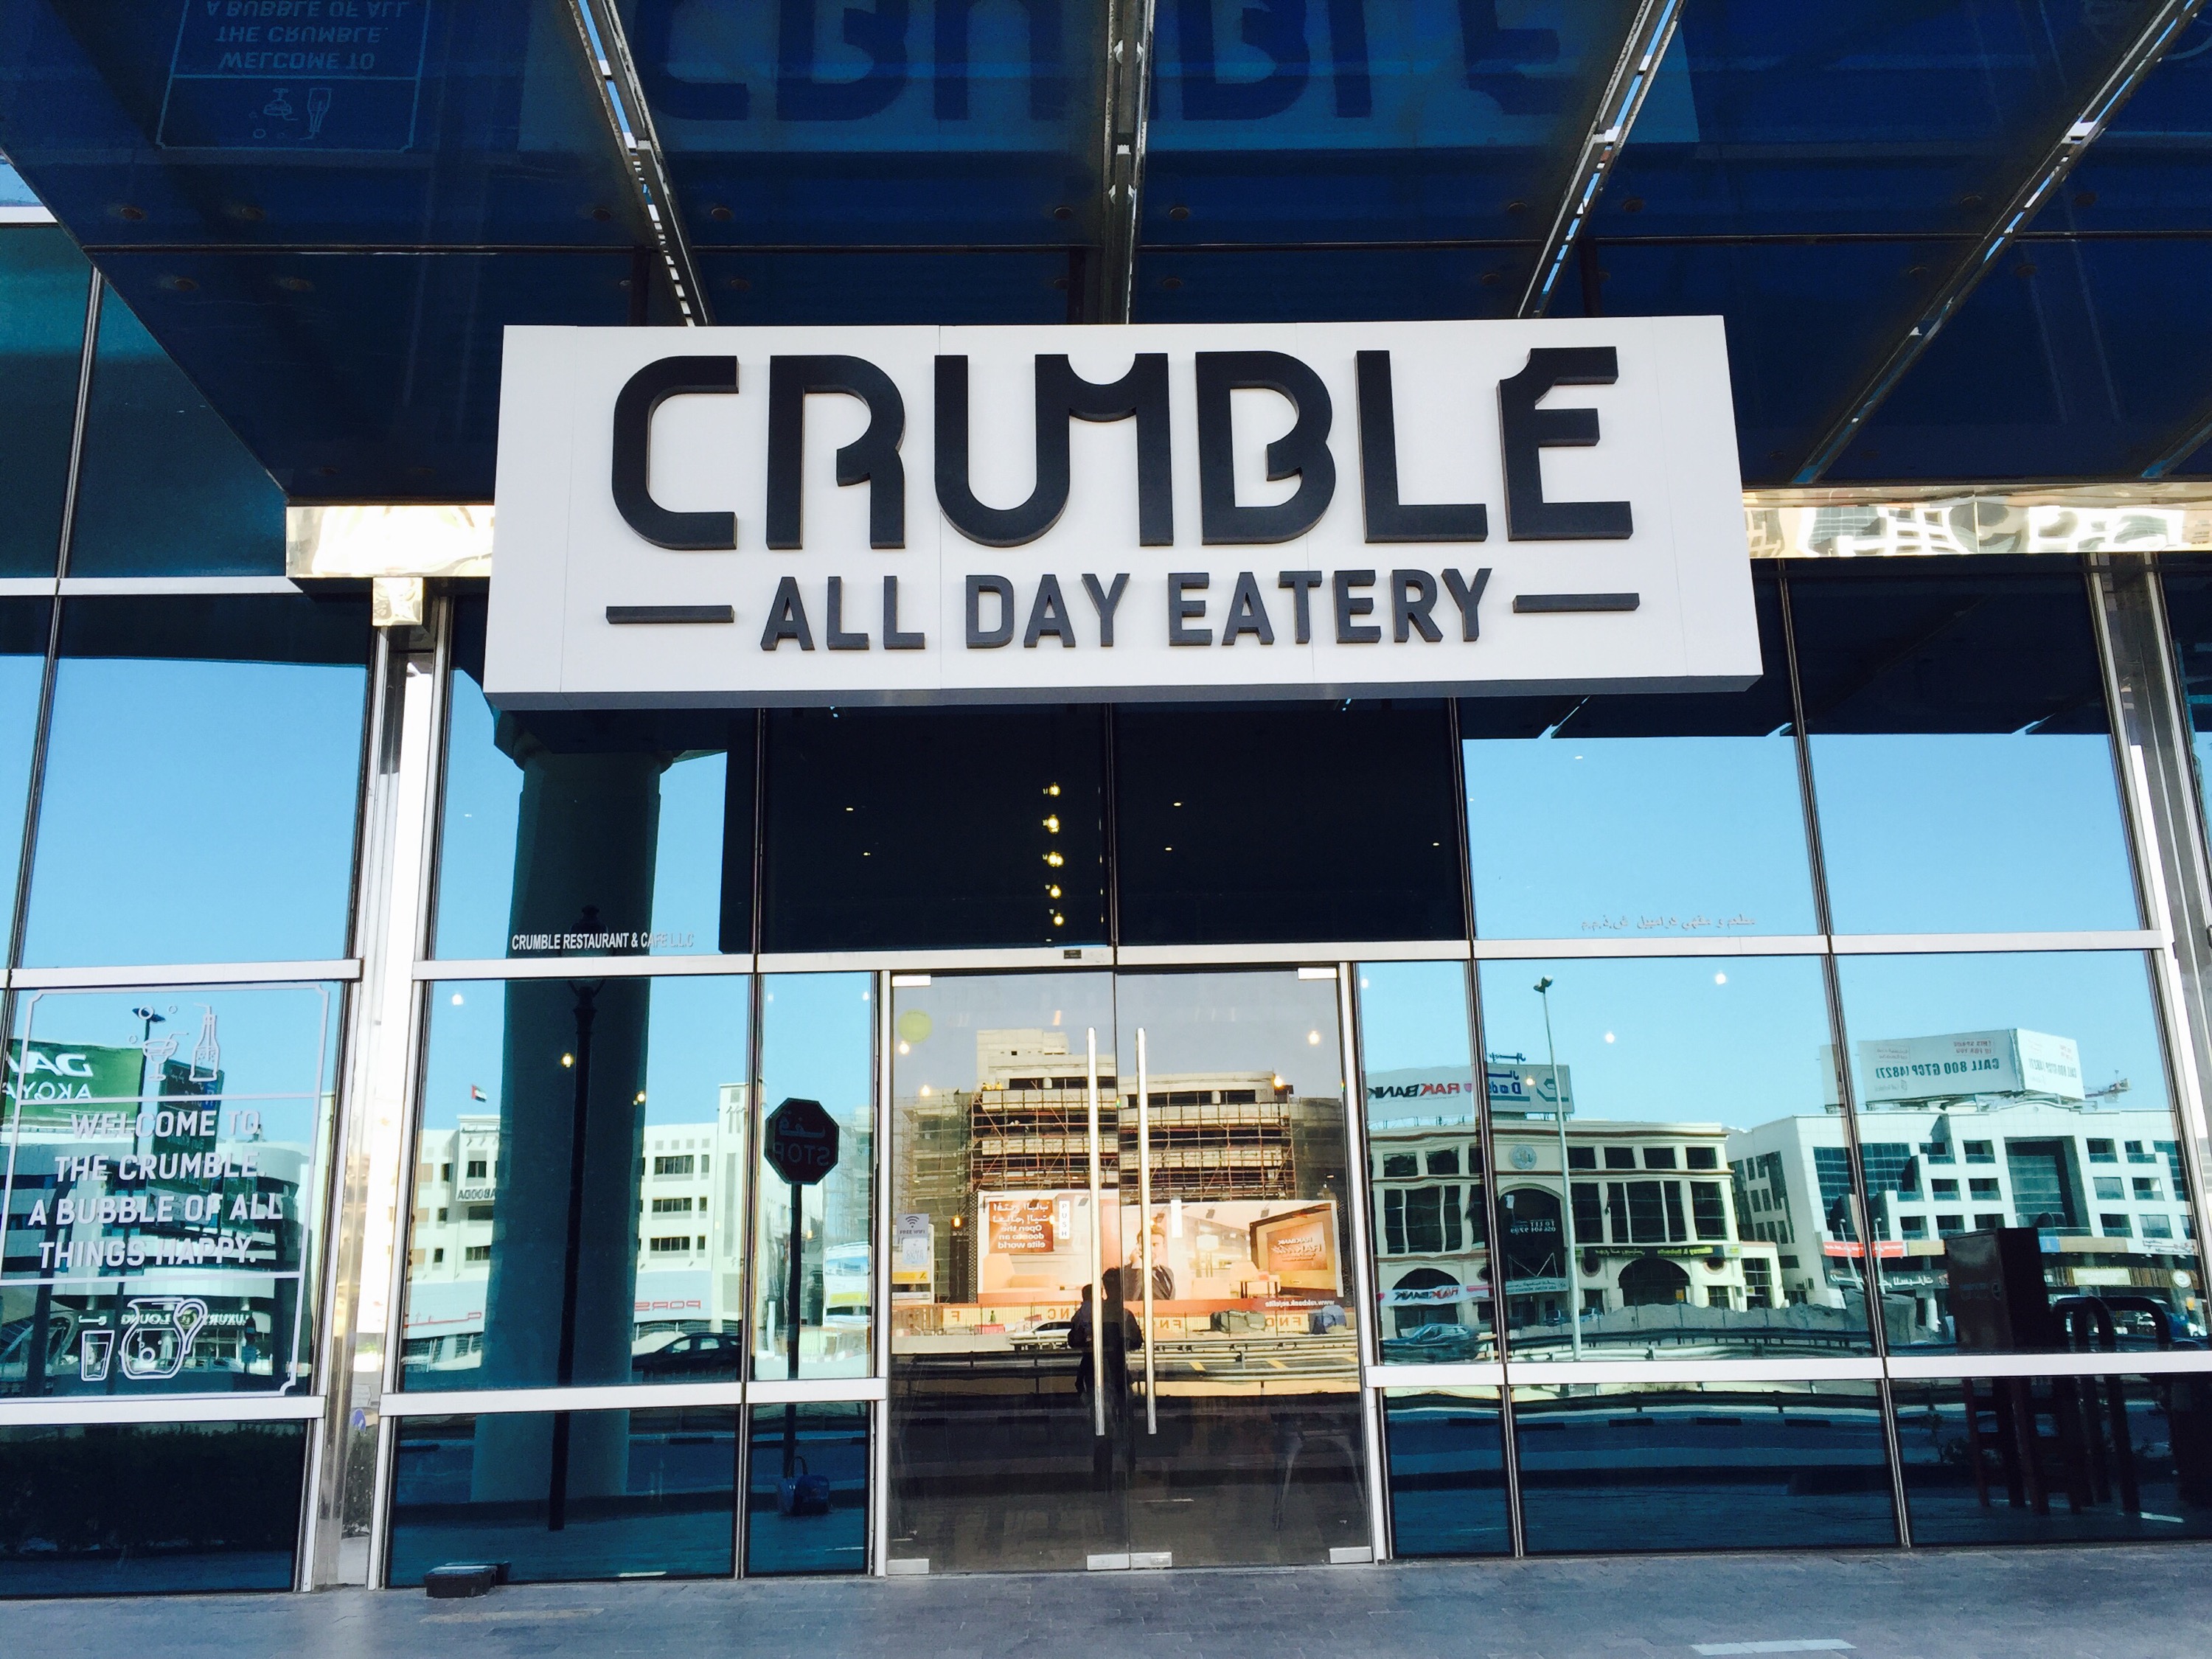 Breakfast at Crumble Cafe…